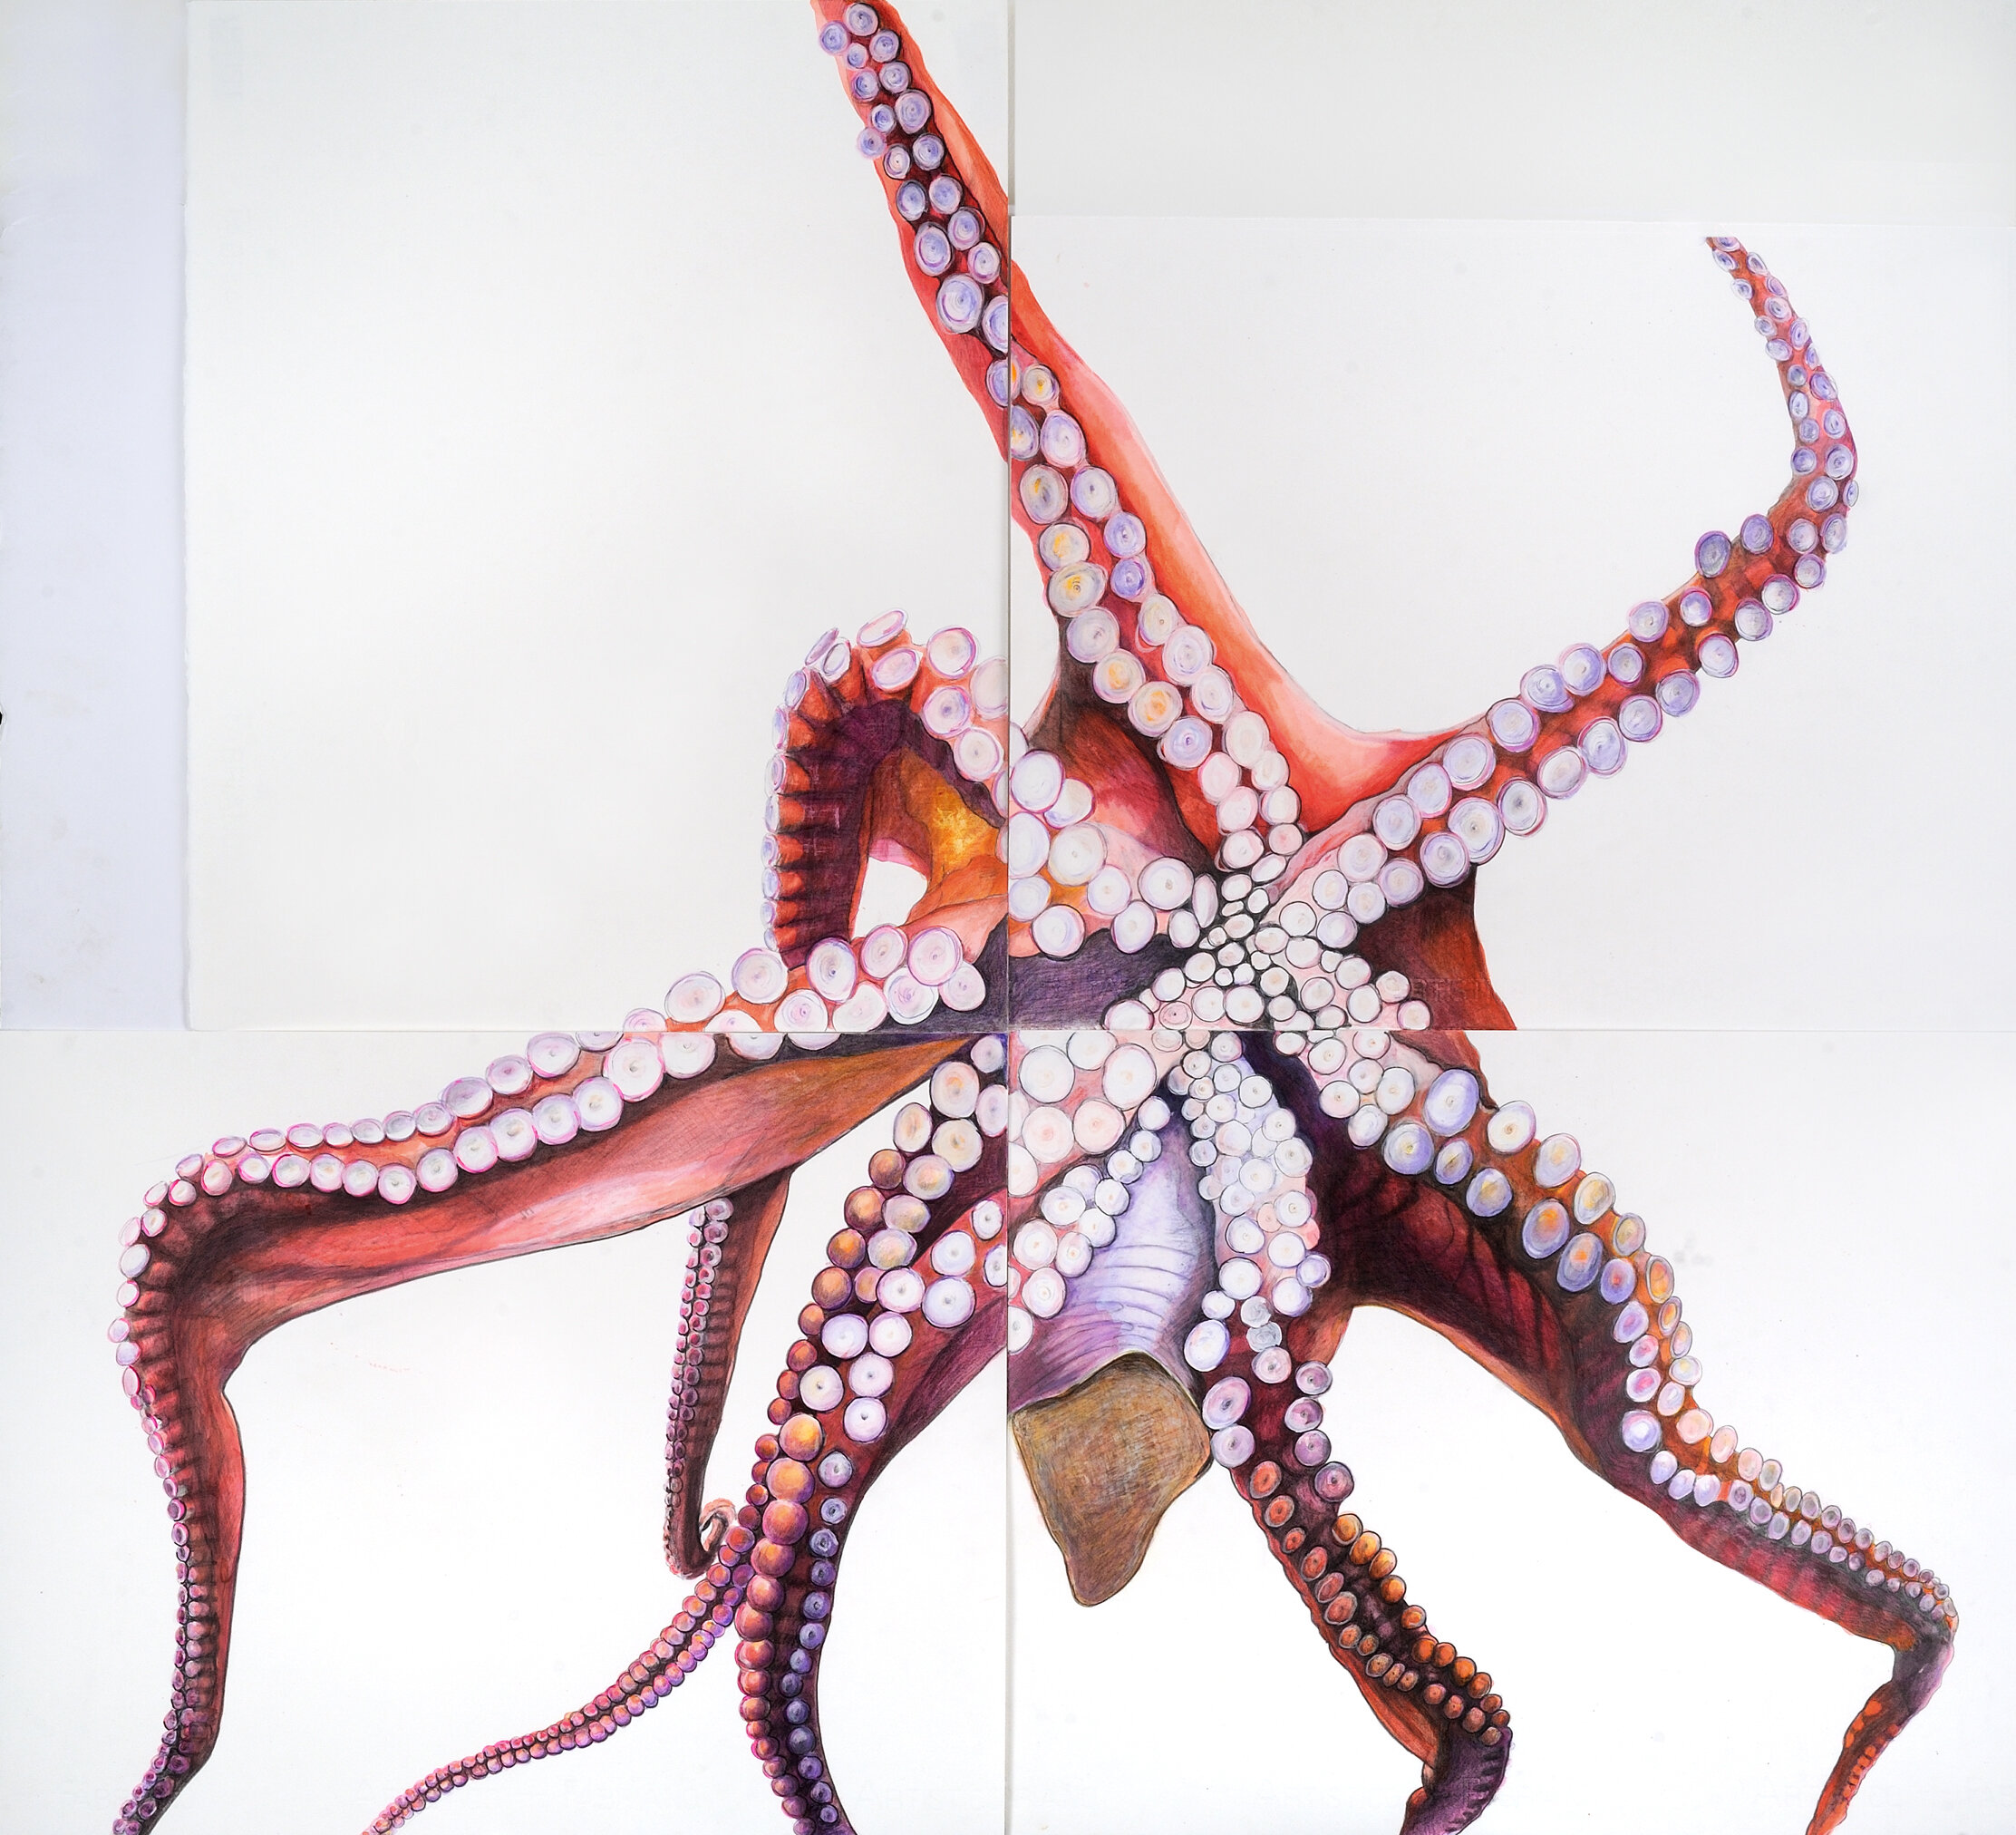  Rebecca Clark  Octopus,  2015-2016   Graphite, watercolor, ink, colored pencil, and oil pastel on paper   Four panels, each measuring: 16 x 20 inches.    Overall: 36 x 40 inches    (Installed in irregular configuration, preferably with slight gaps i